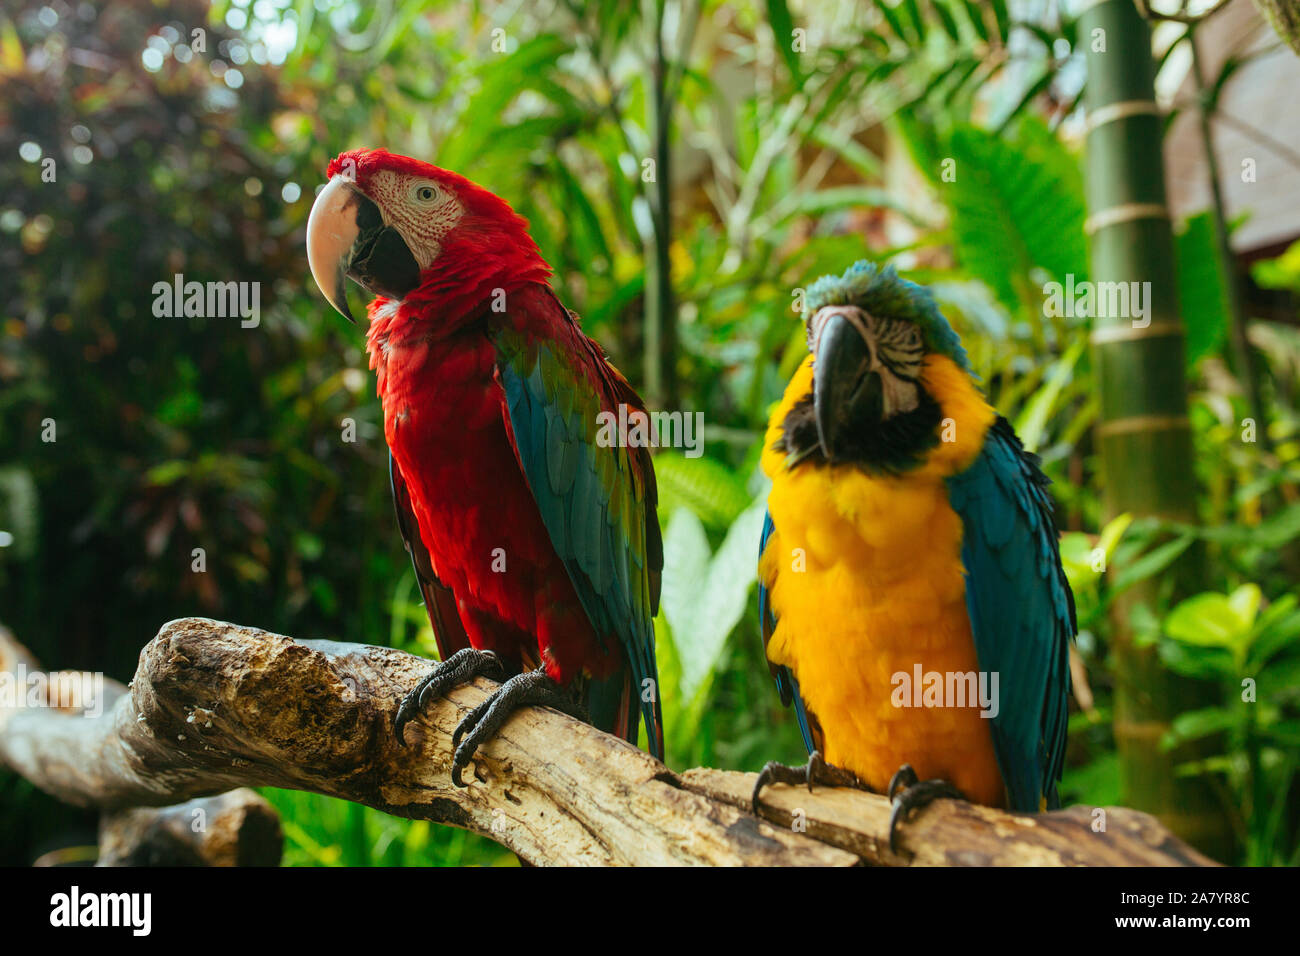 Redand Yellow Macaw Parrots sitting on a branch in a tropical park Stock Photo